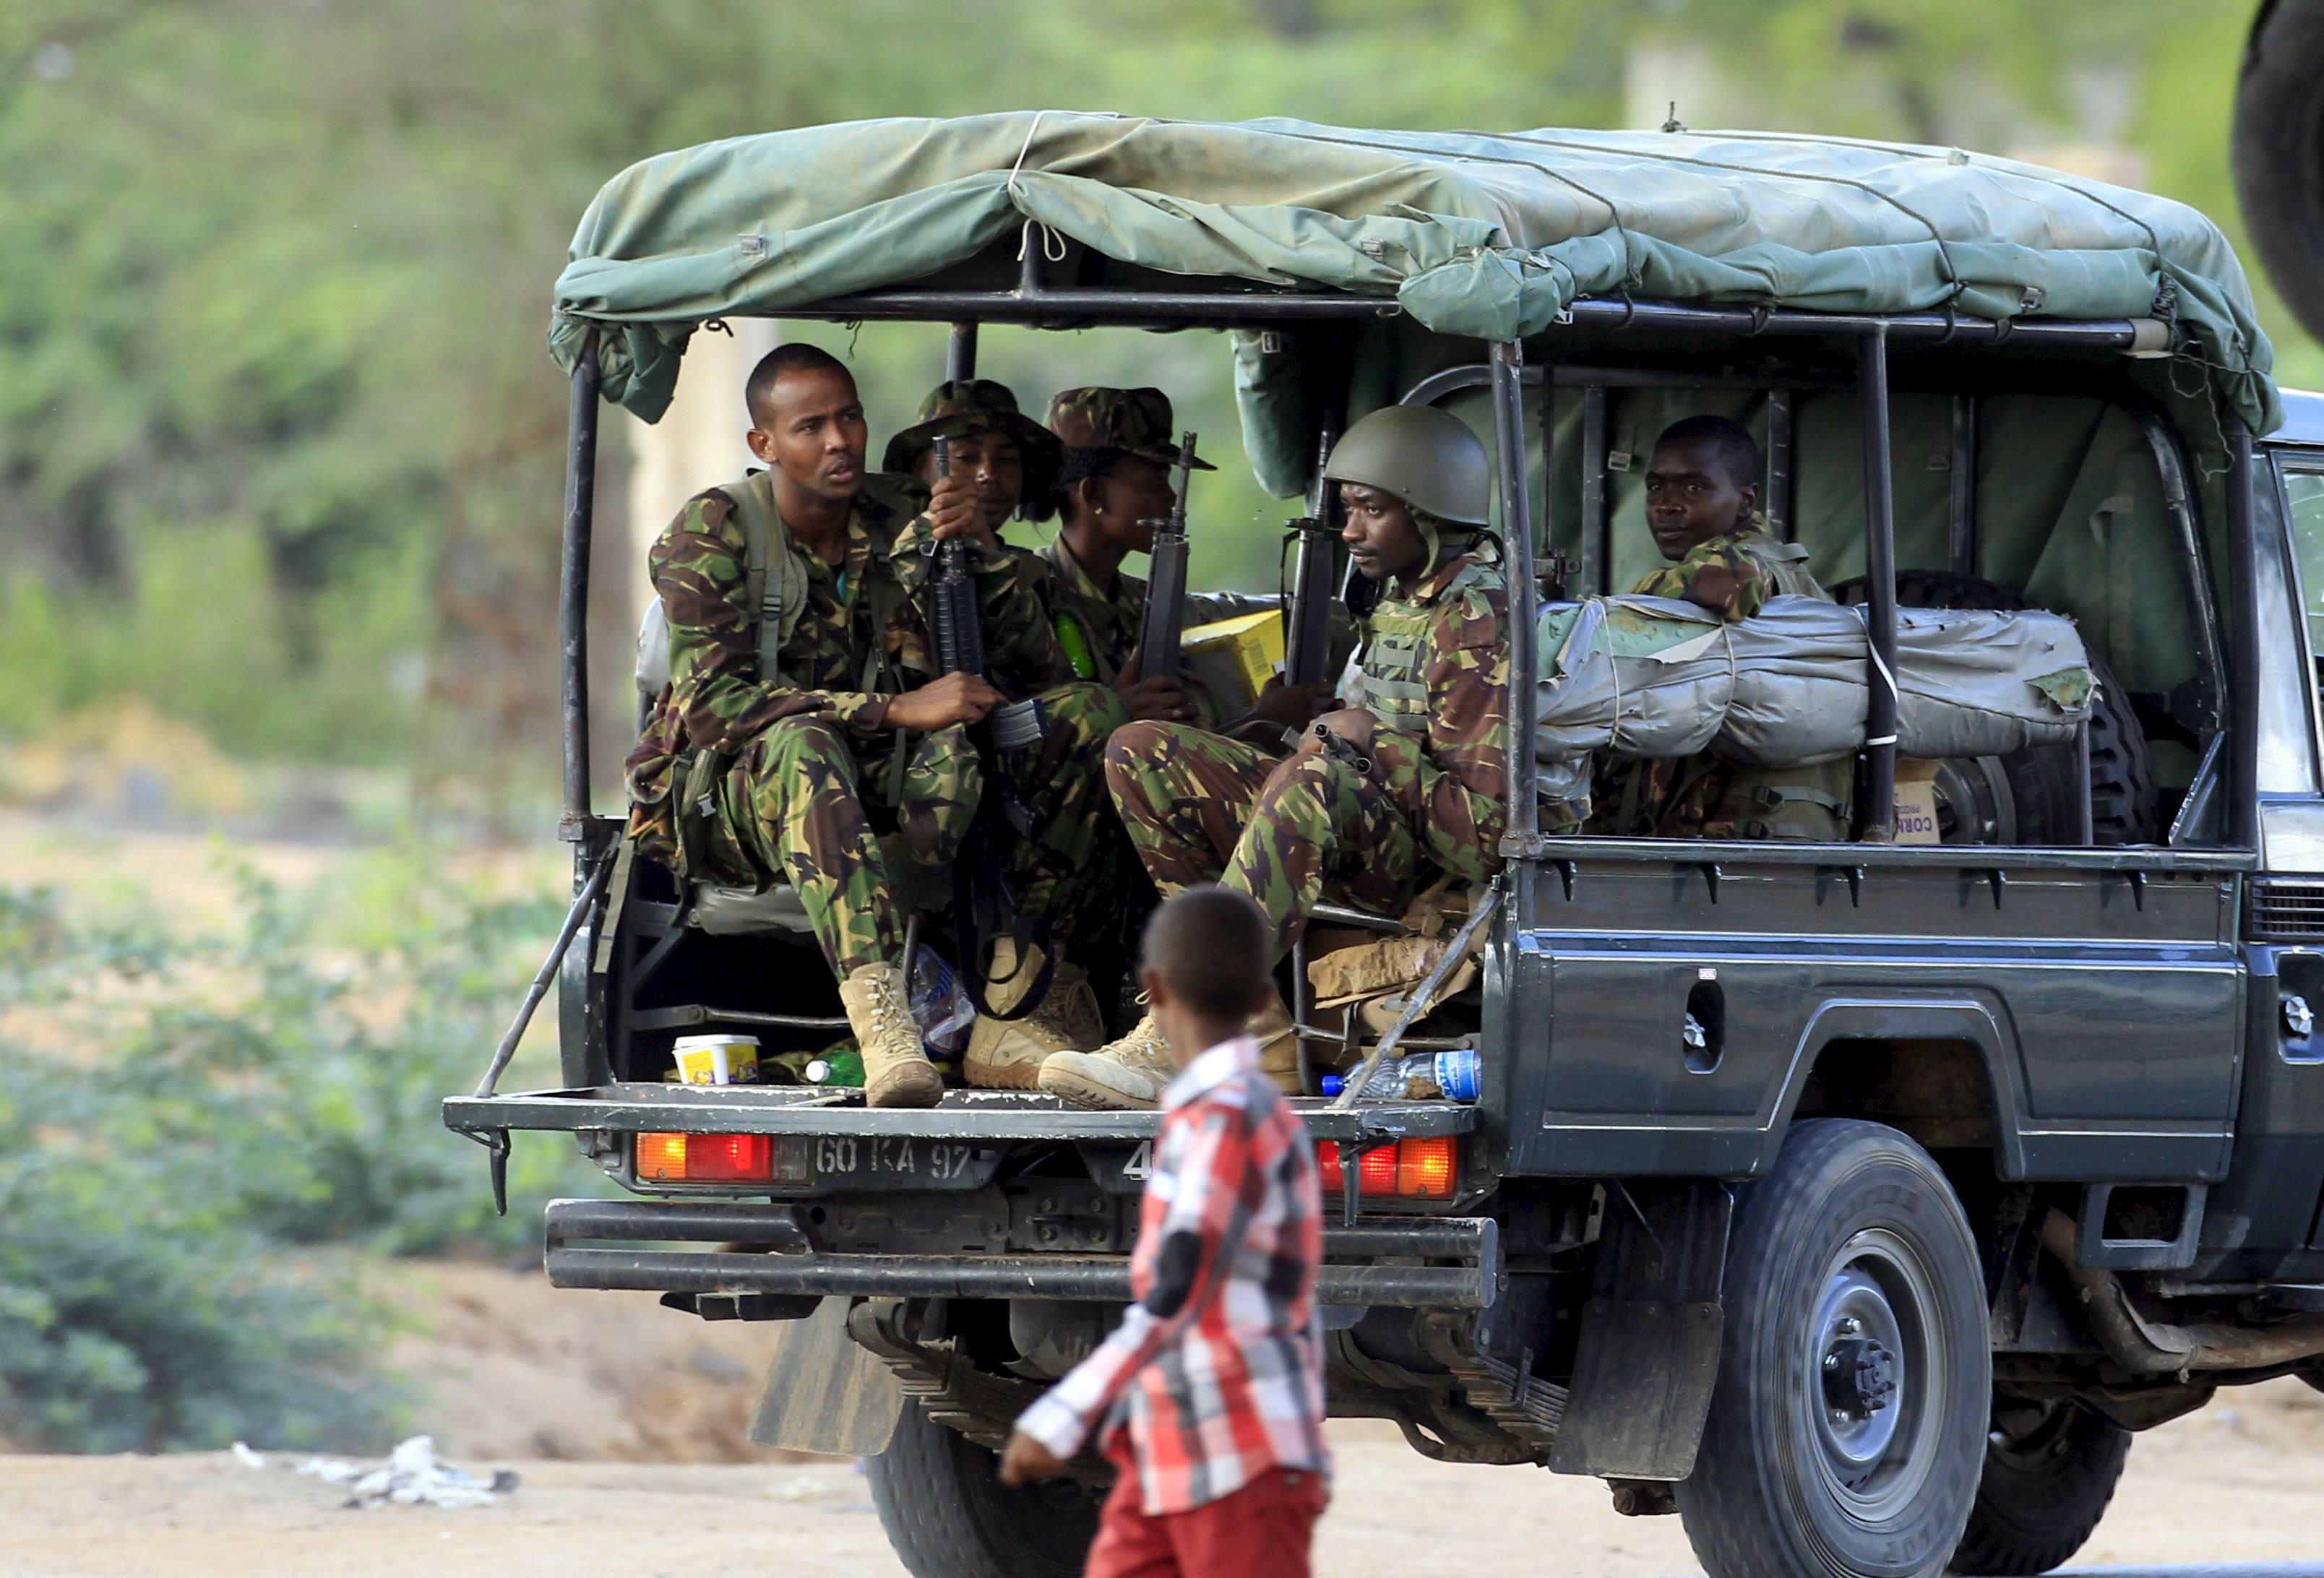 Kenyan Defense Force soldiers patrol after Thursday's attack by gunmen at a university campus in Garissa April 3, 2015.